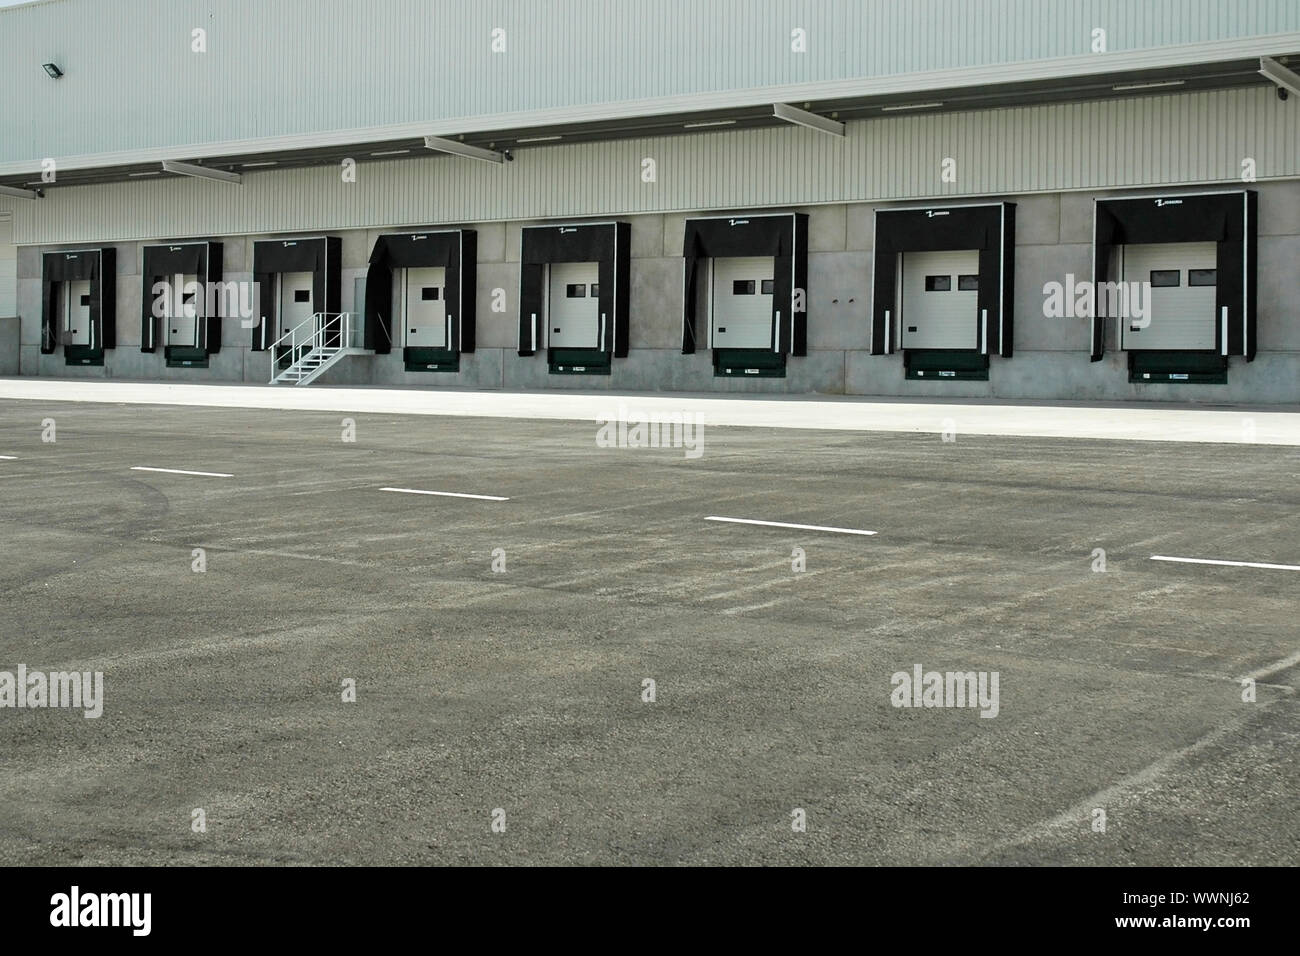 The loading area of a industrial warehouse with several loading bays and a truck. Stock Photo